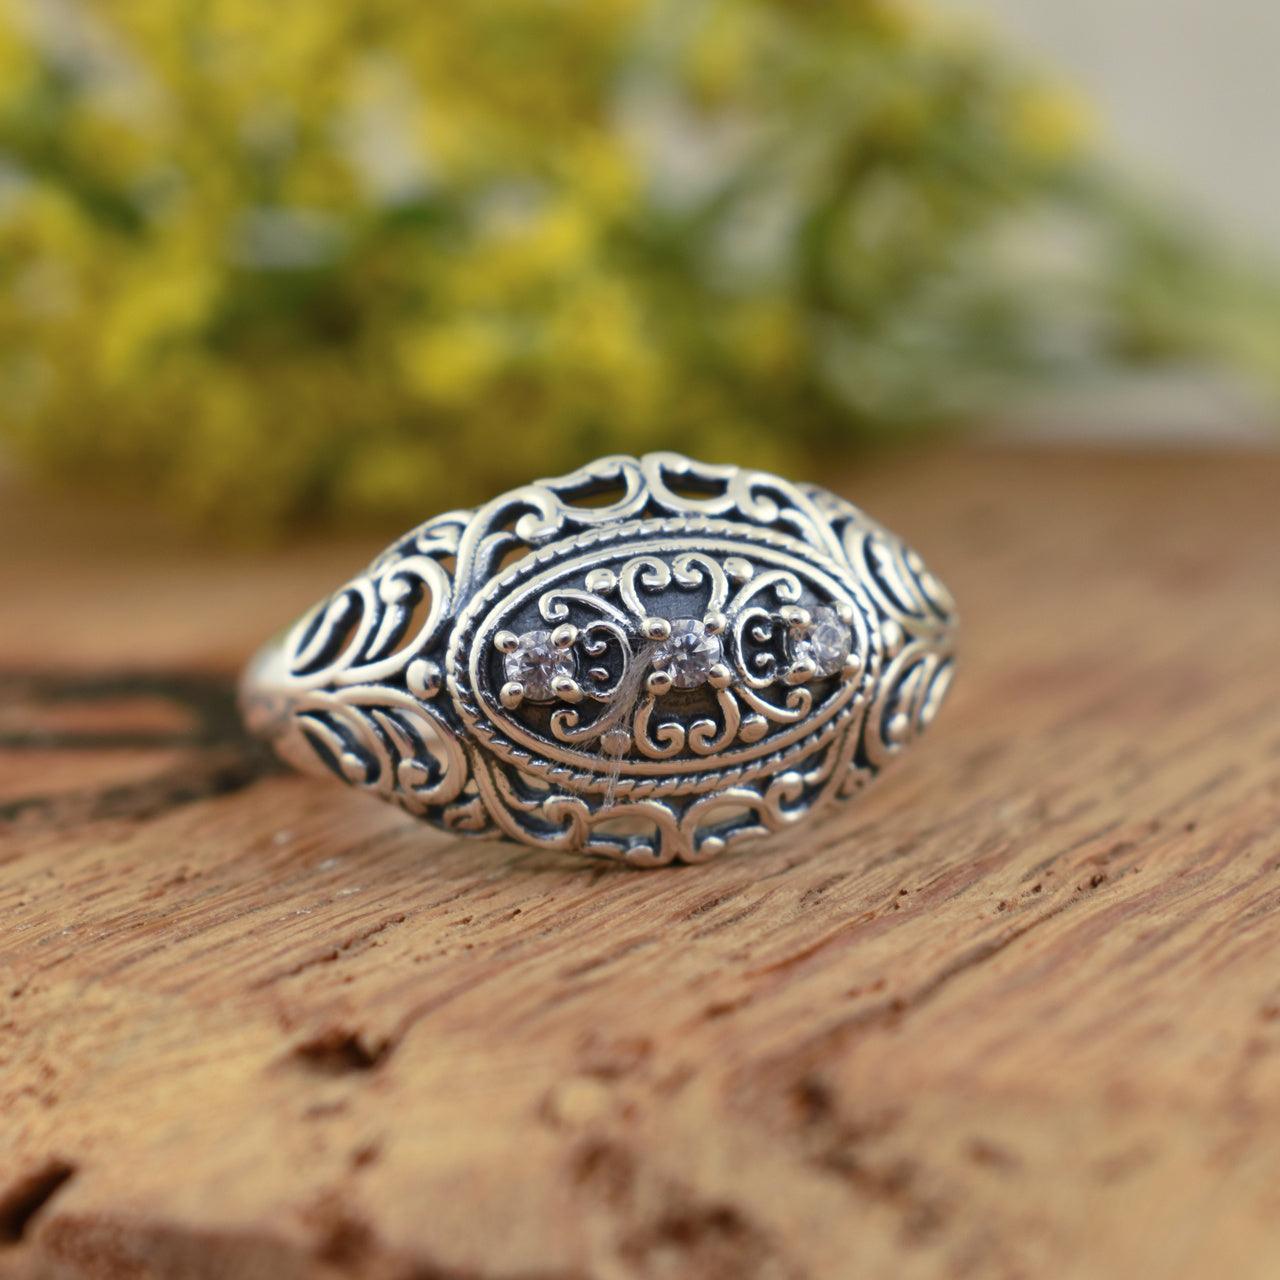 sterling silver antique ring with 3 stones in the center.  Vintage Splendor Ring.